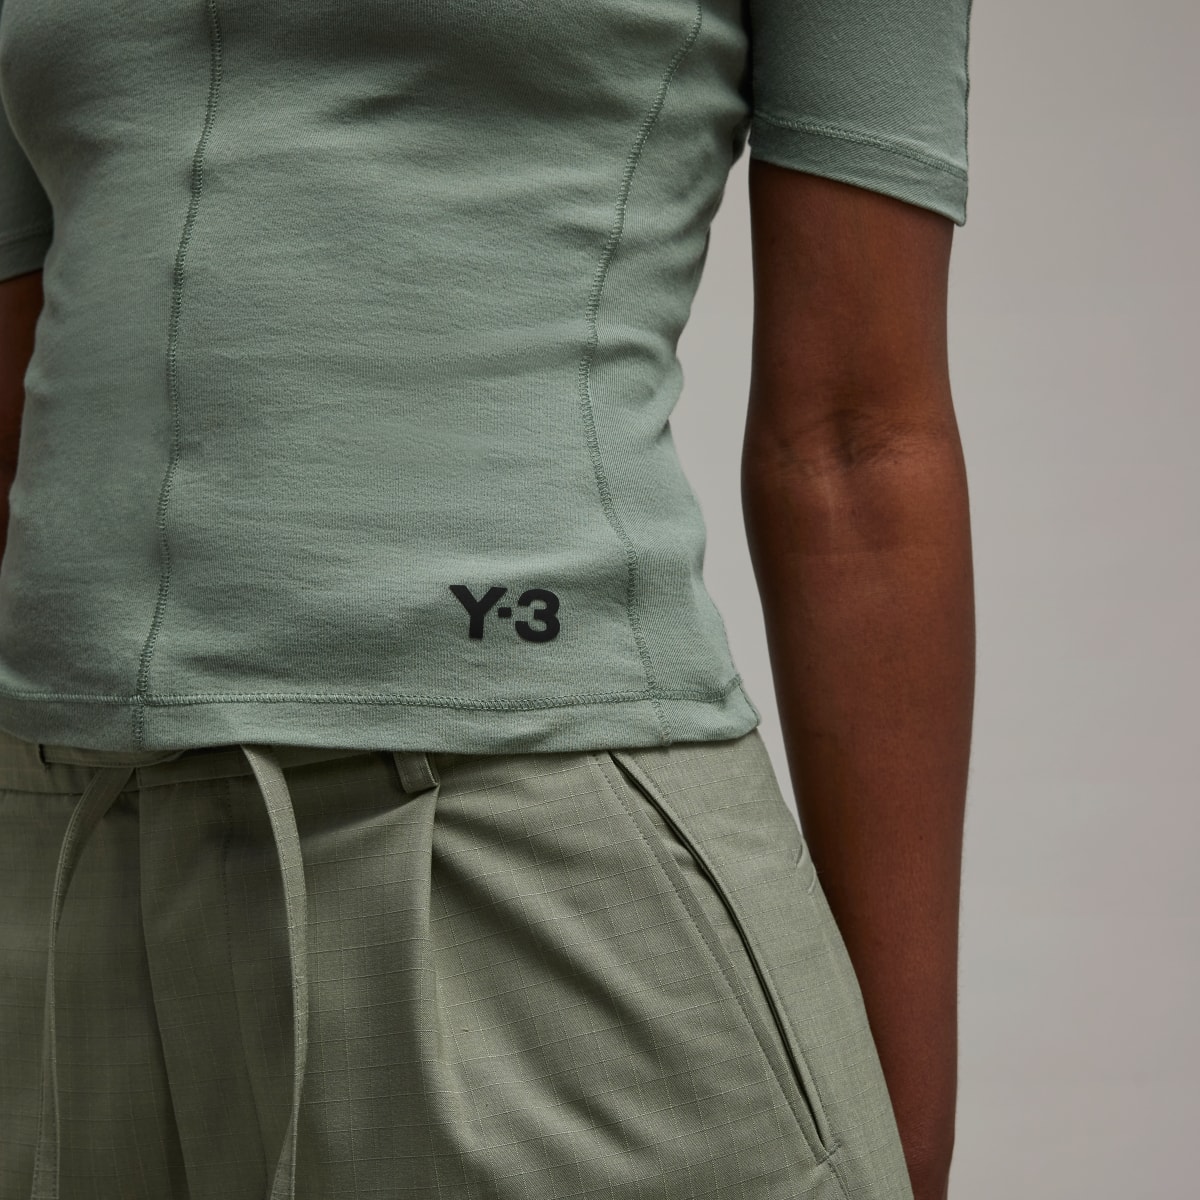 Adidas Y-3 Fitted Short Sleeve Tee. 6